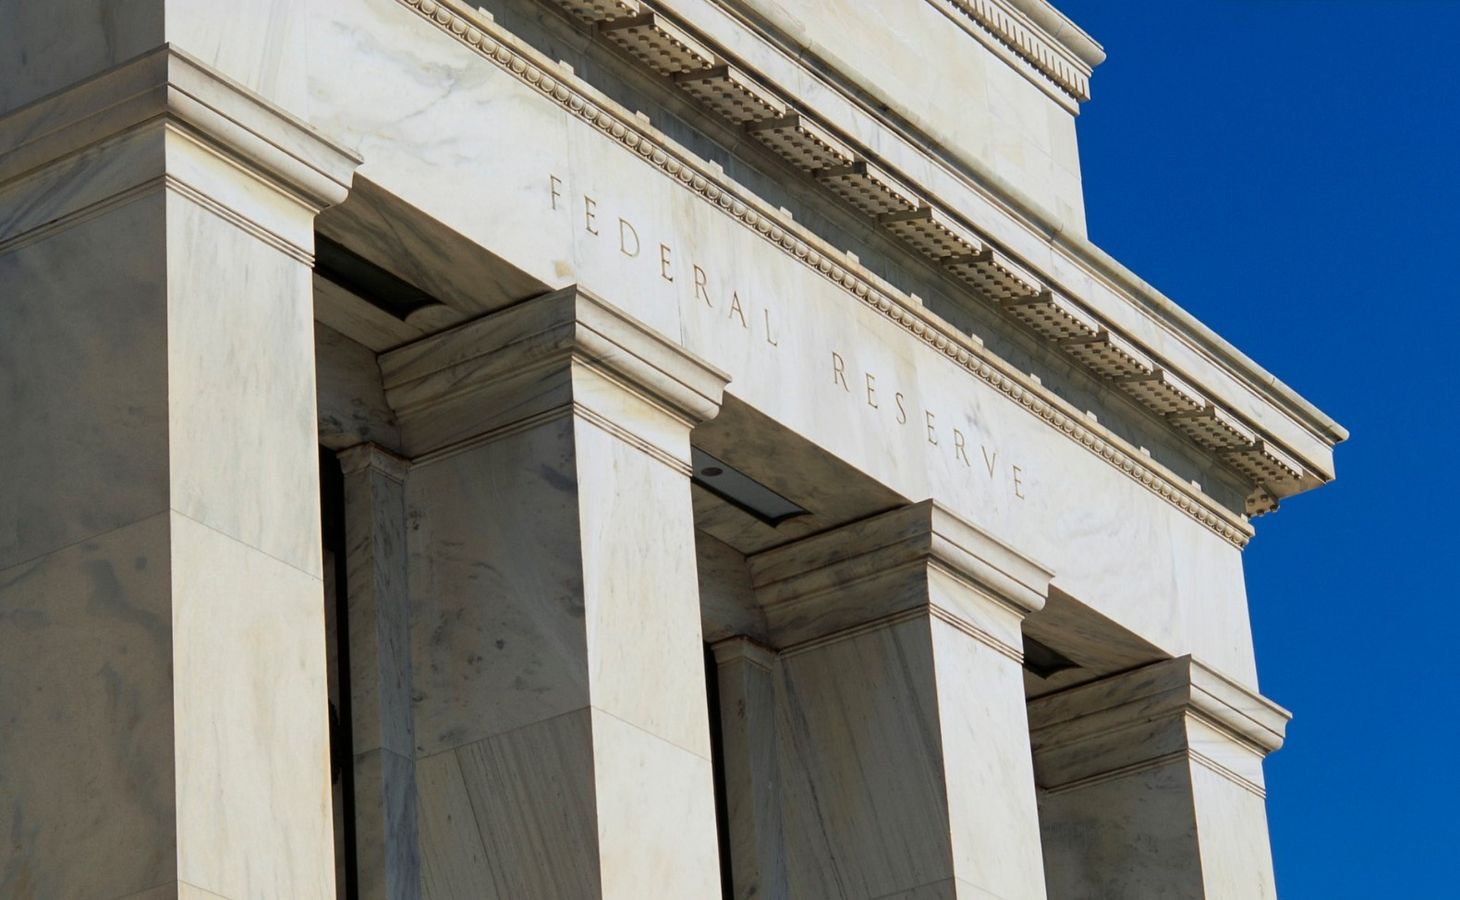 Fed official: New real-time payment system starts summer '23